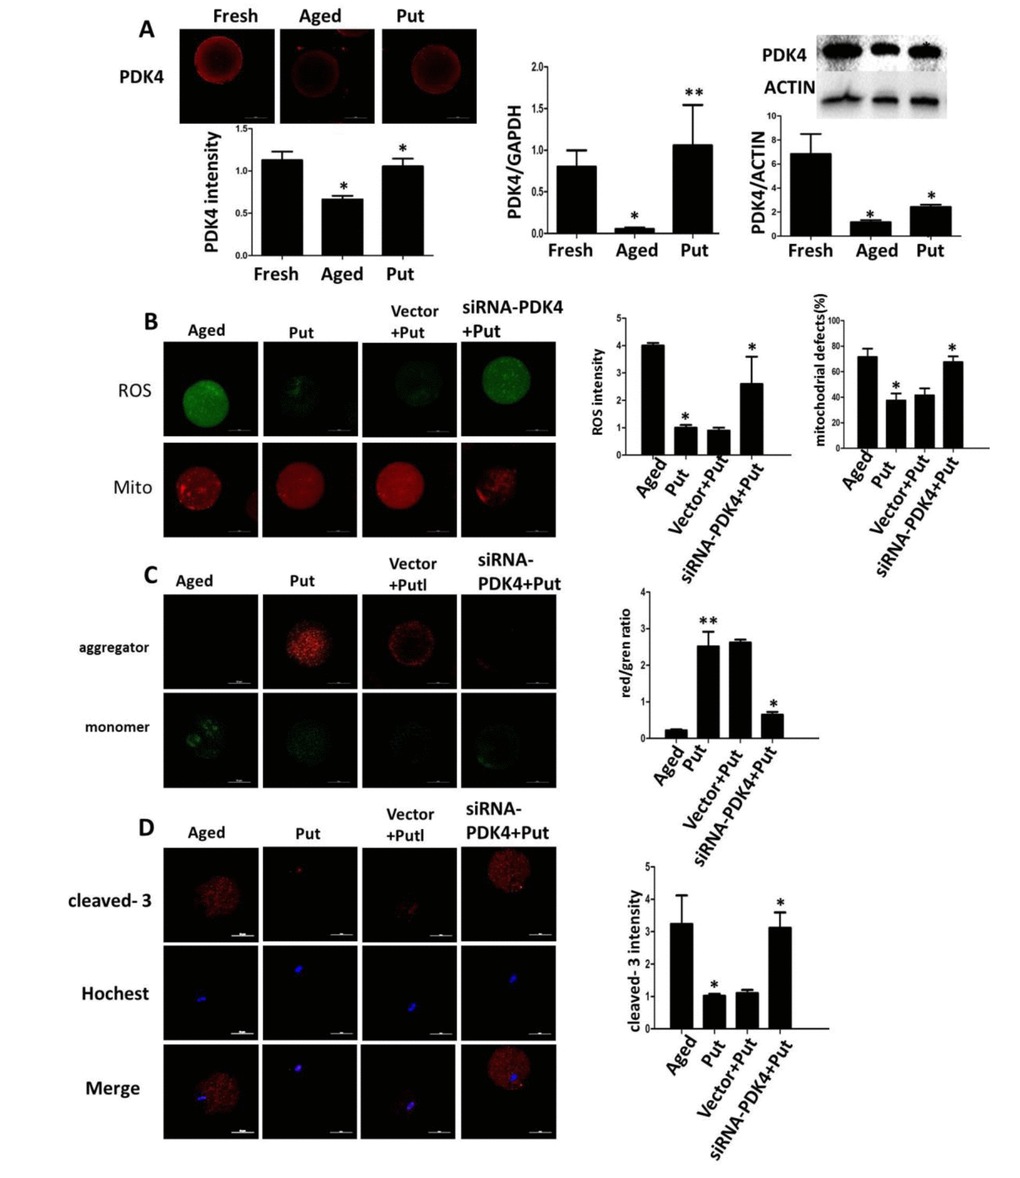 Effects of putrescine on PDK4 expression, oxidative stress, and apoptosis in the oocytes during postovulatory aging. (A) The effect of putrescine on PDK4 expression was tested by immunofluorescence, qPCR and Western blot. Putrescine rescued the downregulation of PDK4 at both the mRNA and protein levels in the aging oocytes. (B) The effects of putrescine on the ROS level and mitochondrial distribution in the aging oocytes. Putrescine significantly reduced the ROS level and the number of aggregated mitochondria in the aging oocytes. If PDK4 expression was downregulated by siRNA, the above effects of putrescine were significantly weakened. (C) The effect of putrescine on the MMP was related to mitochondrial activity. Putrescine significantly raised the MMP in the aging oocytes. However, this effect was blocked by siRNA-PDK4. (D) The effect of putrescine on the cleaved caspase 3 was related to apoptosis in the aging oocytes. Putrescine significantly inhibited the increased level of cleaved caspase 3 in the oocytes during postovulatory aging. This effect of putrescine was partially blocked by the downregulation of PDK4. *pp